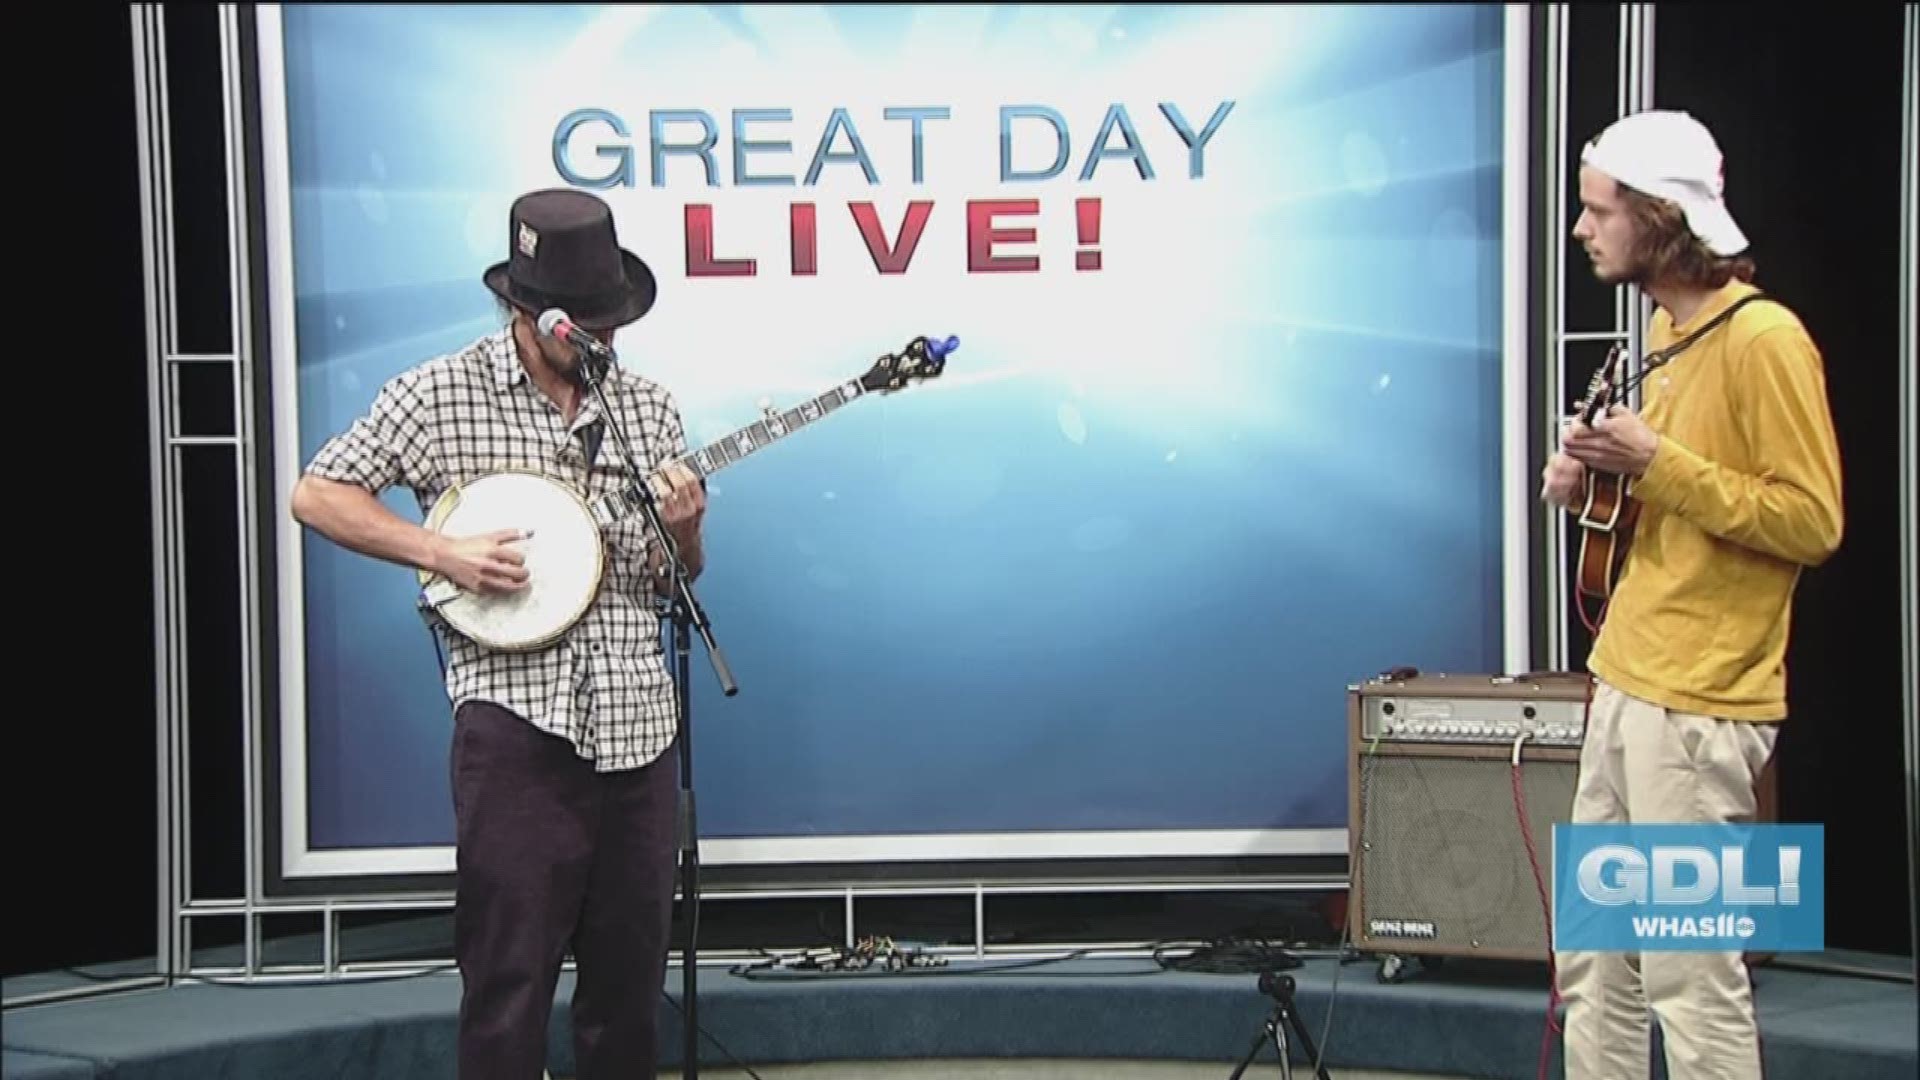 Jonathan Bramel and Chris Cupp of Restless Leg String Band performed on Great Day Live.